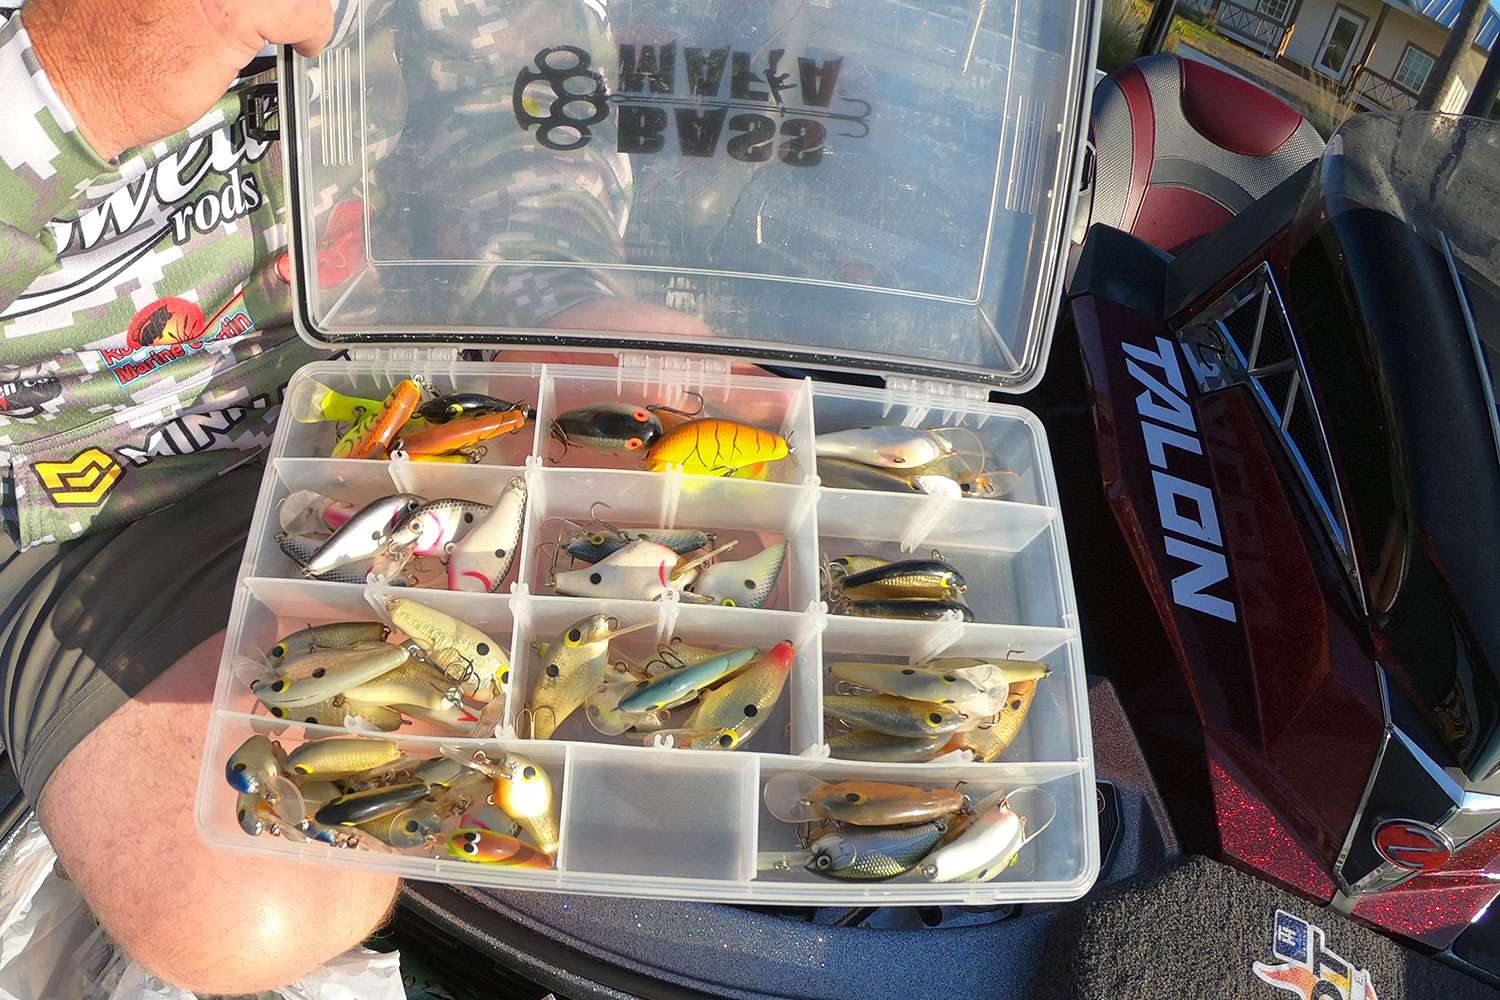 And then ... crankbaits.